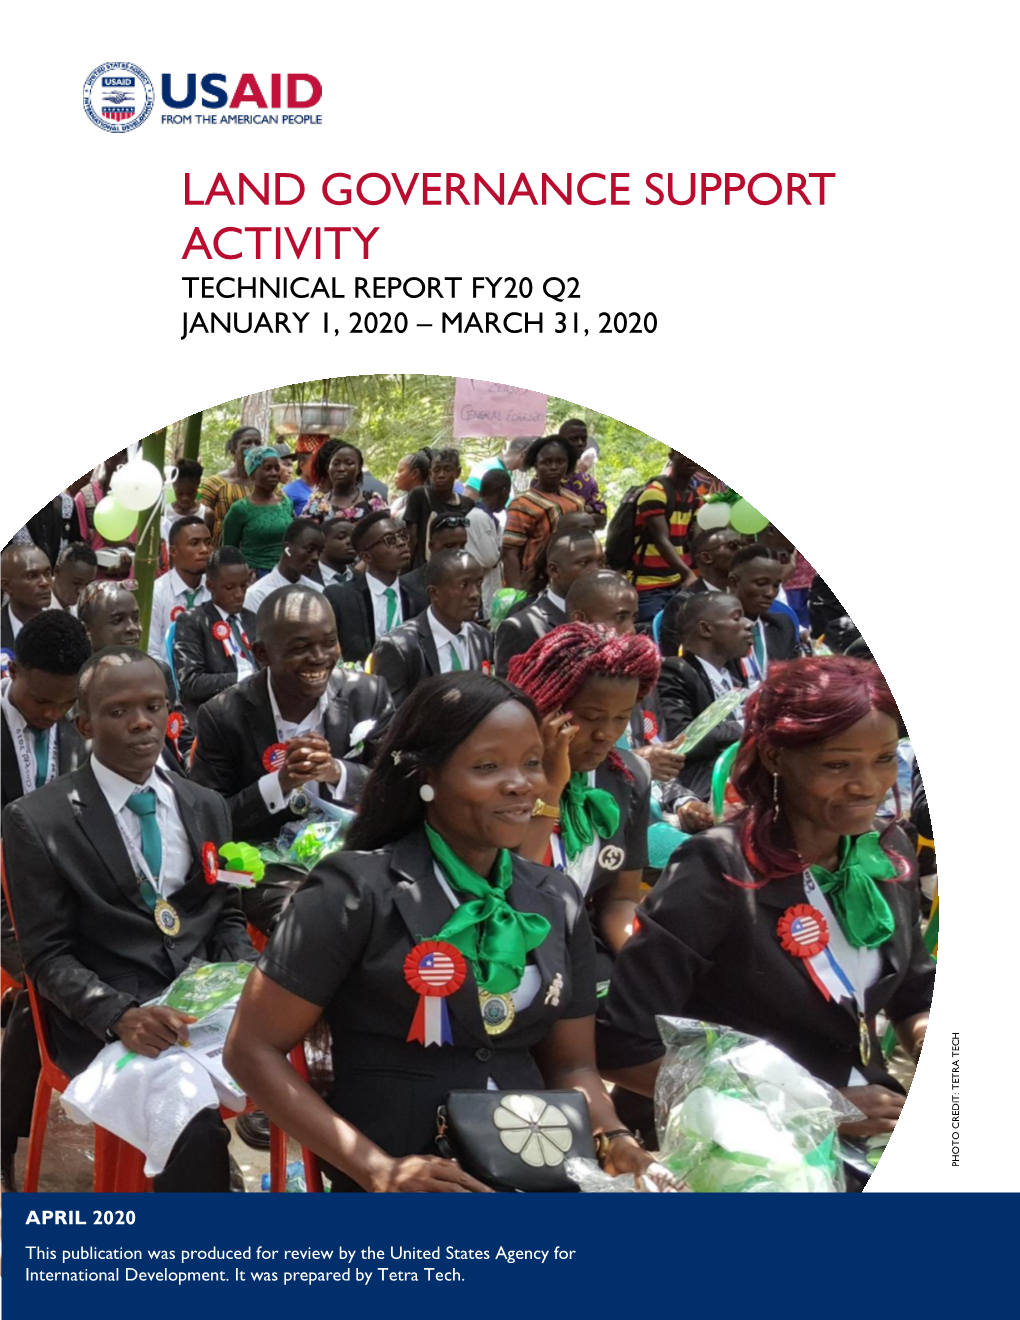 Land Governance Support Activity Technical Report Fy20 Q2 January 1, 2020 – March 31, 2020